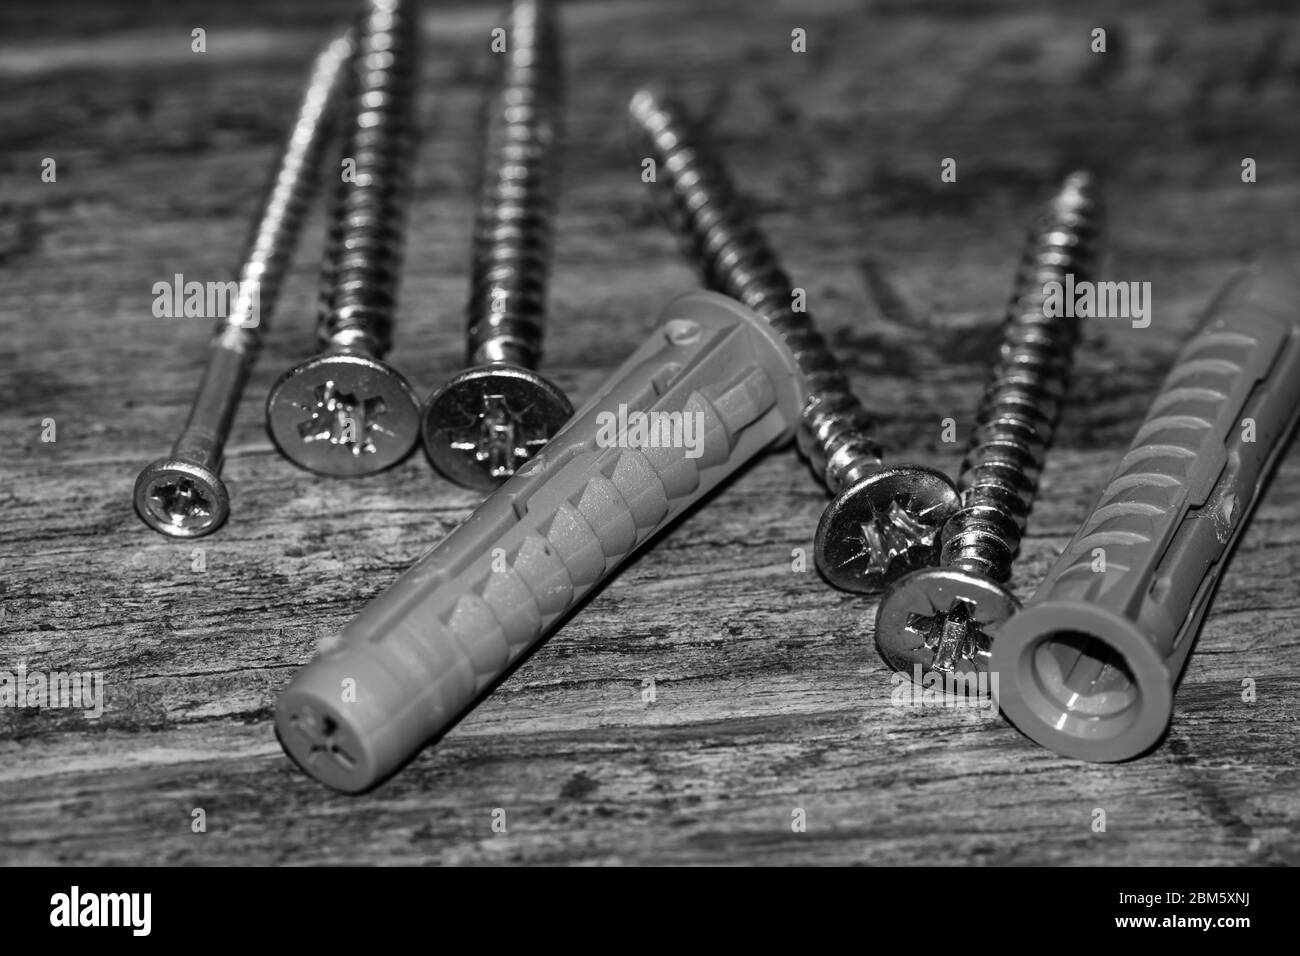 Close up photo of screws, set of screws in a construction abstraction. Industrial background with screws on a wooden board. Stock Photo